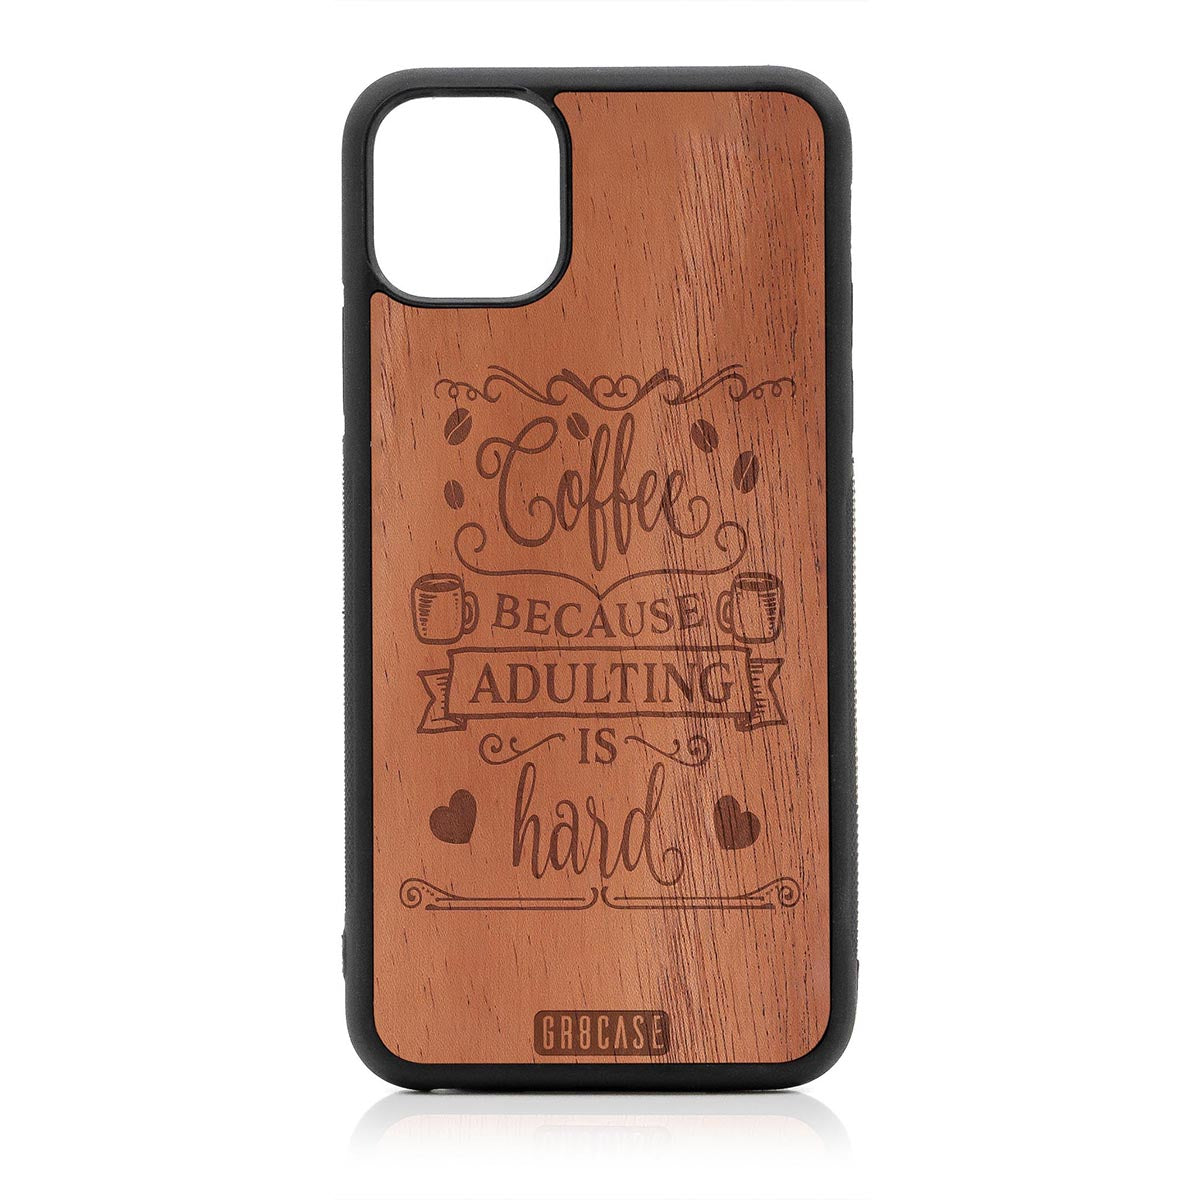 Coffee Because Adulting Is Hard Design Wood Case For iPhone 11 Pro Max by GR8CASE